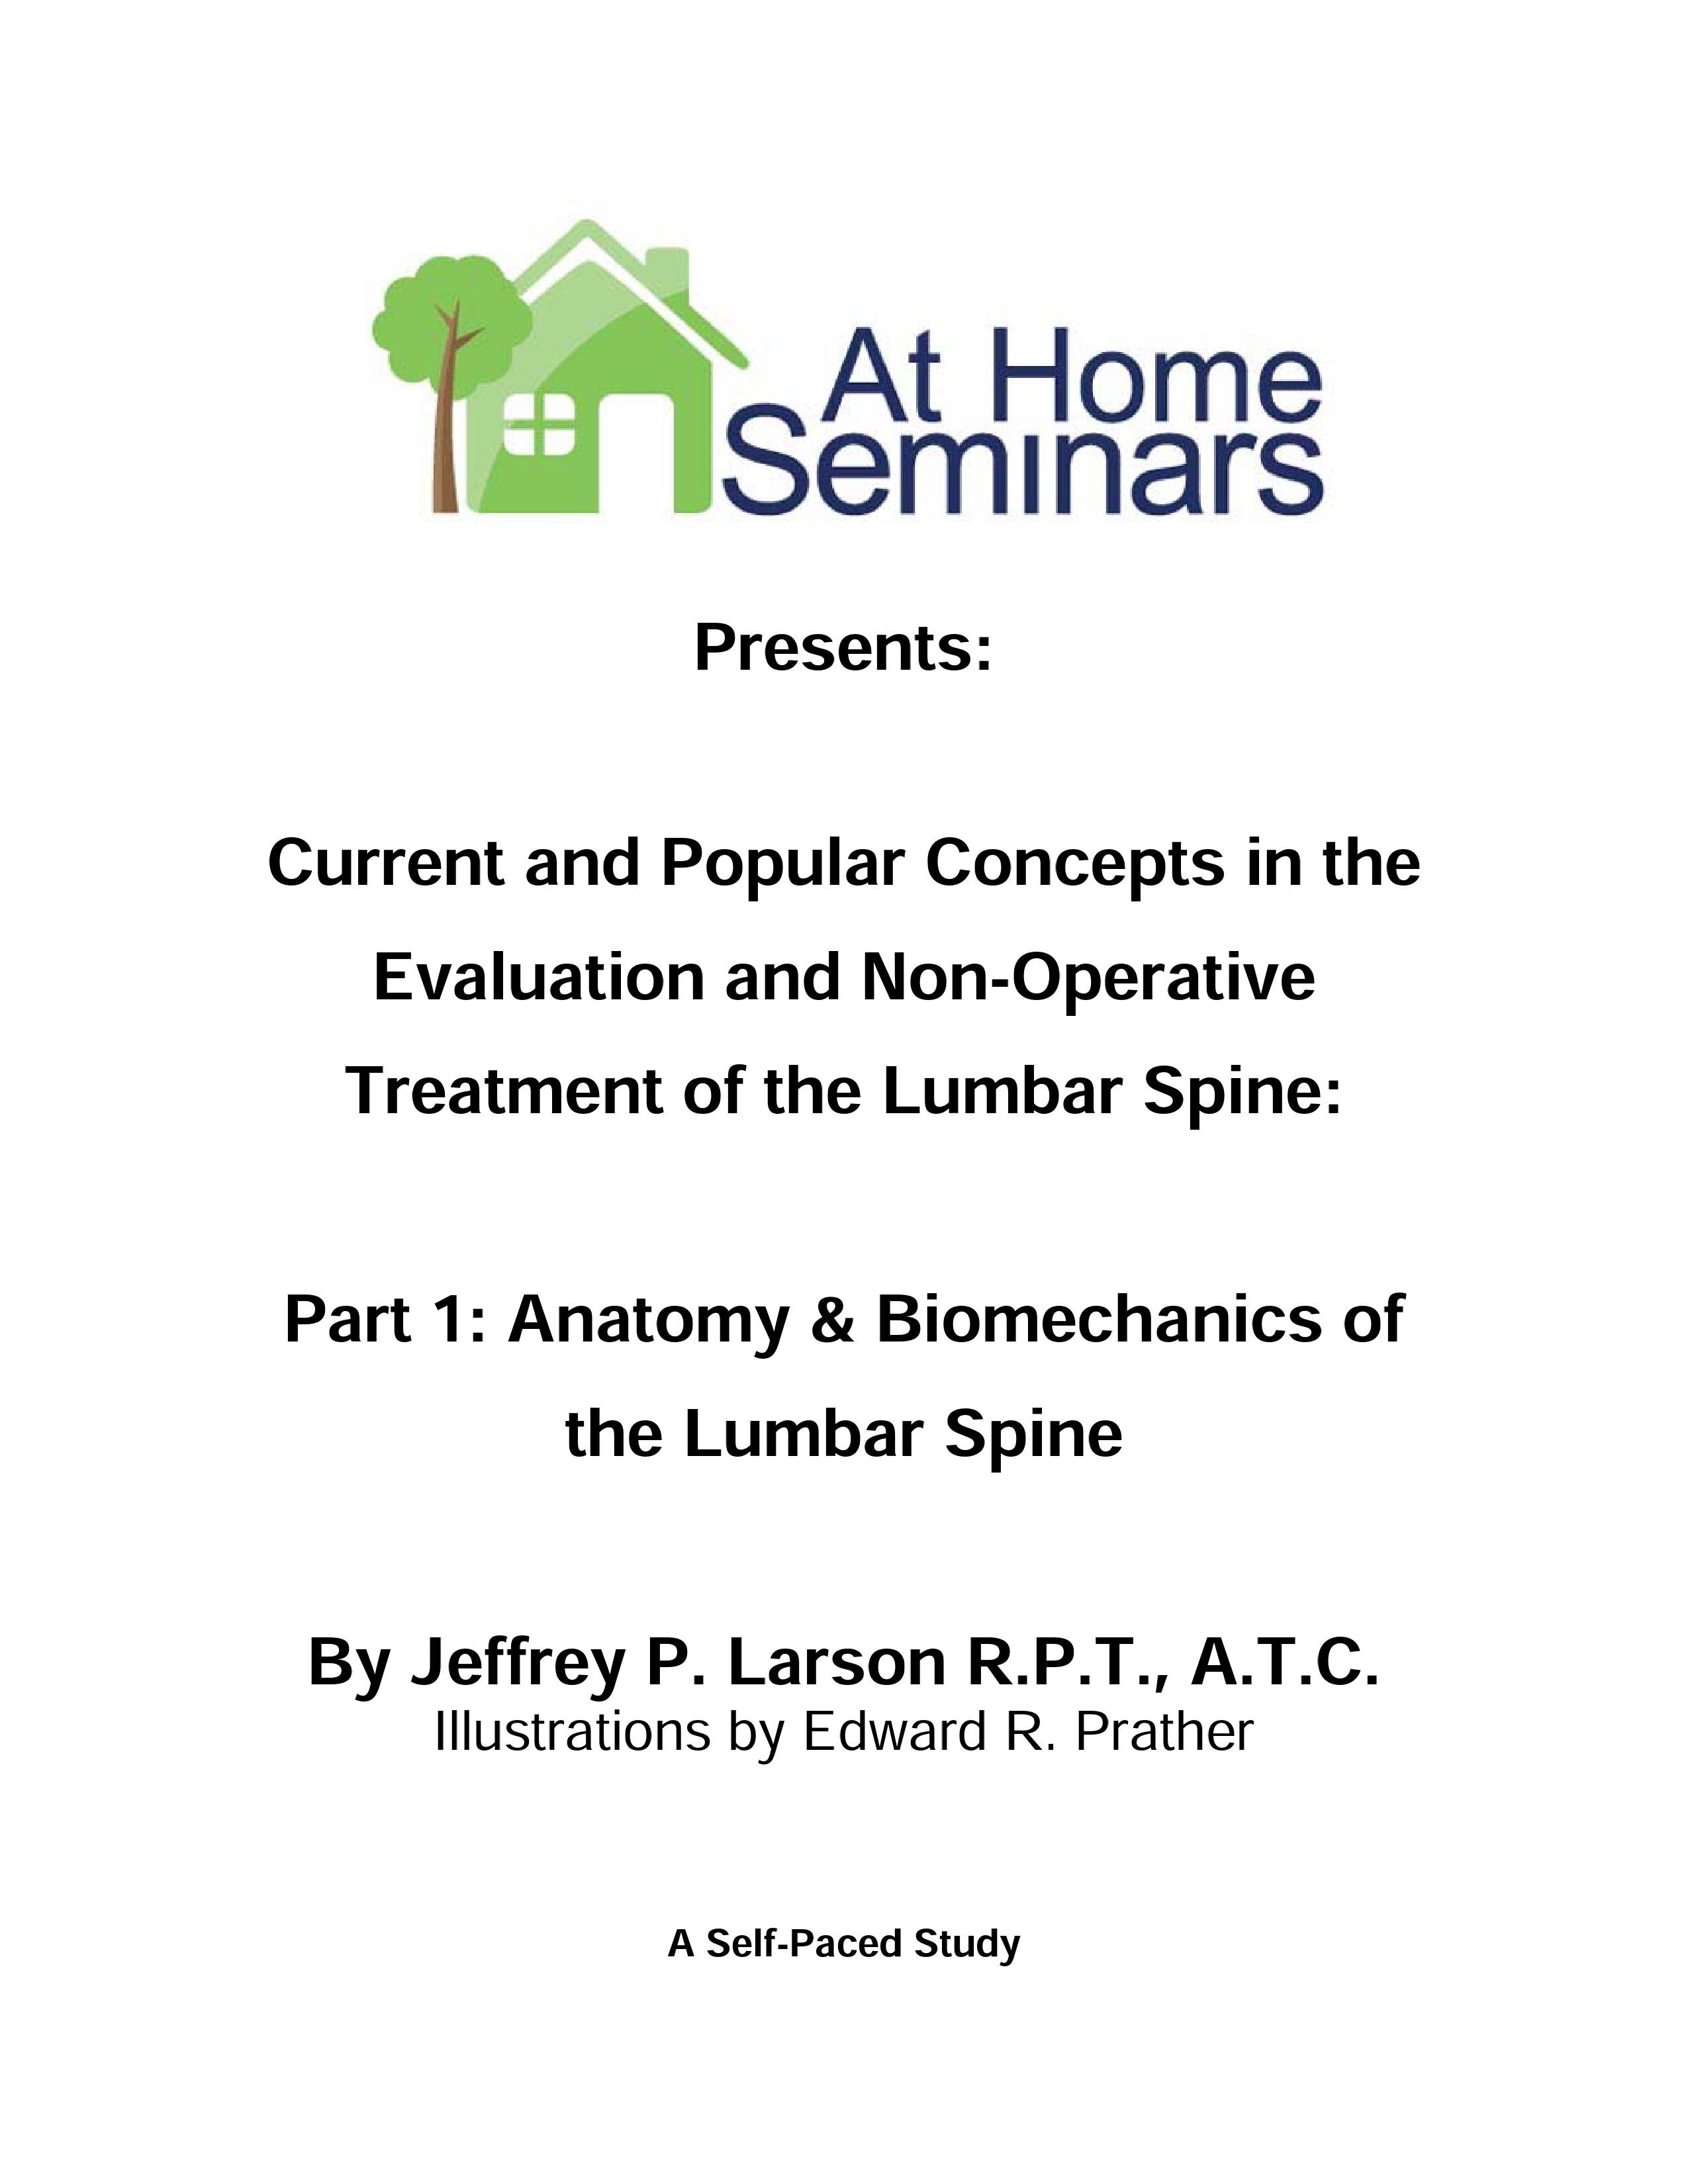 Share A Course: Current & Popular Concepts in the Evaluation and Non-Operative Treatment of the Lumbar Spine: Part 1: Lumbar Spine Anatomy & Biomechanics 